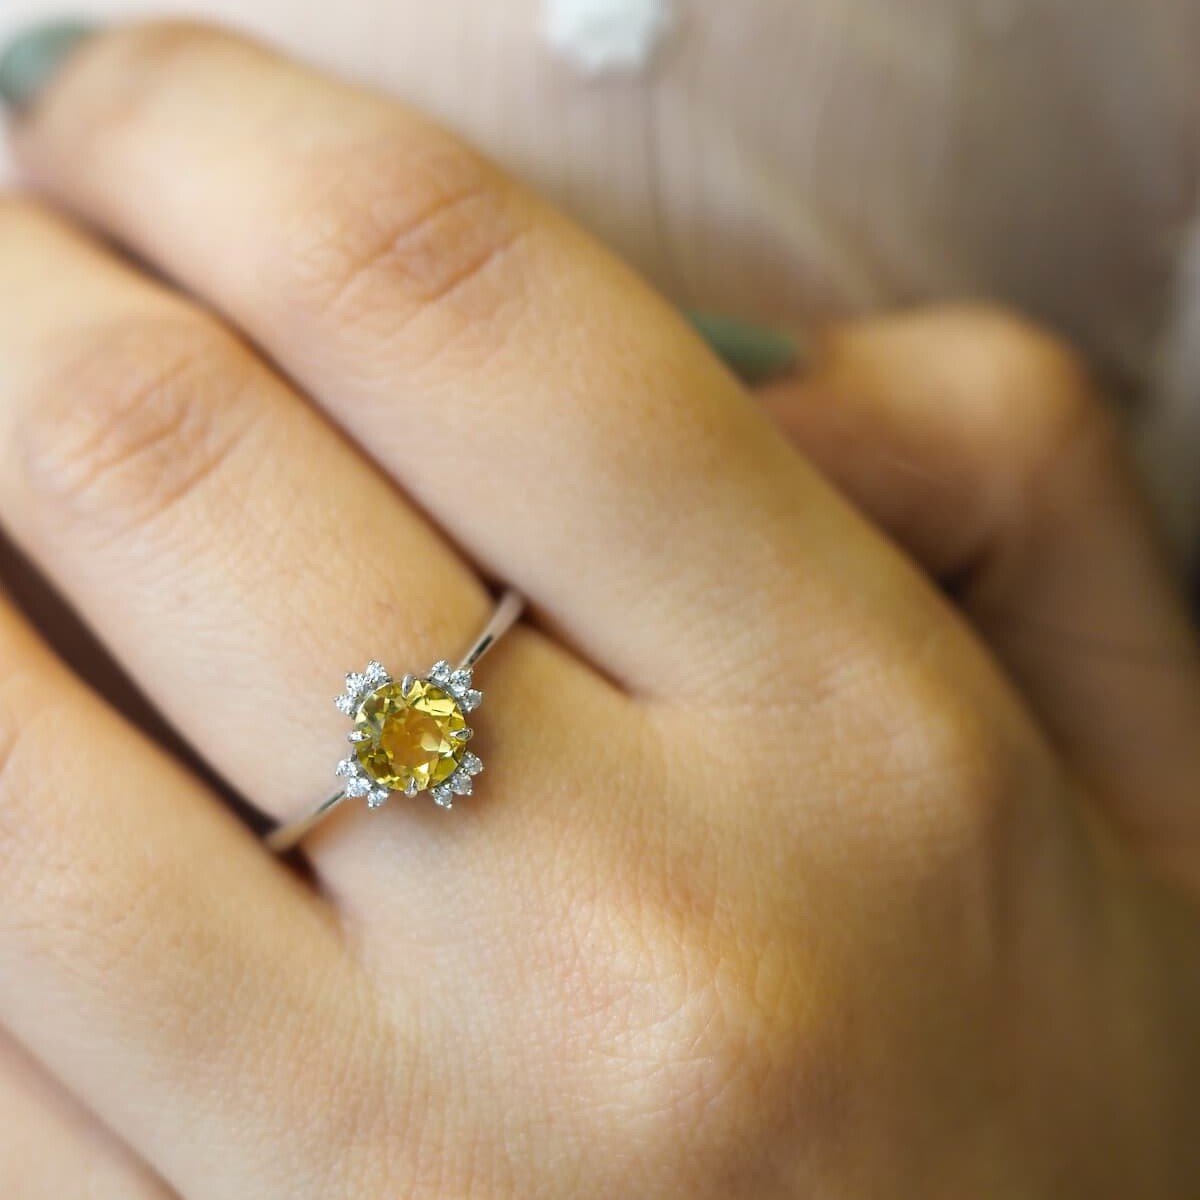 Sublime Gold Women Yellow Sapphire Stone Ring